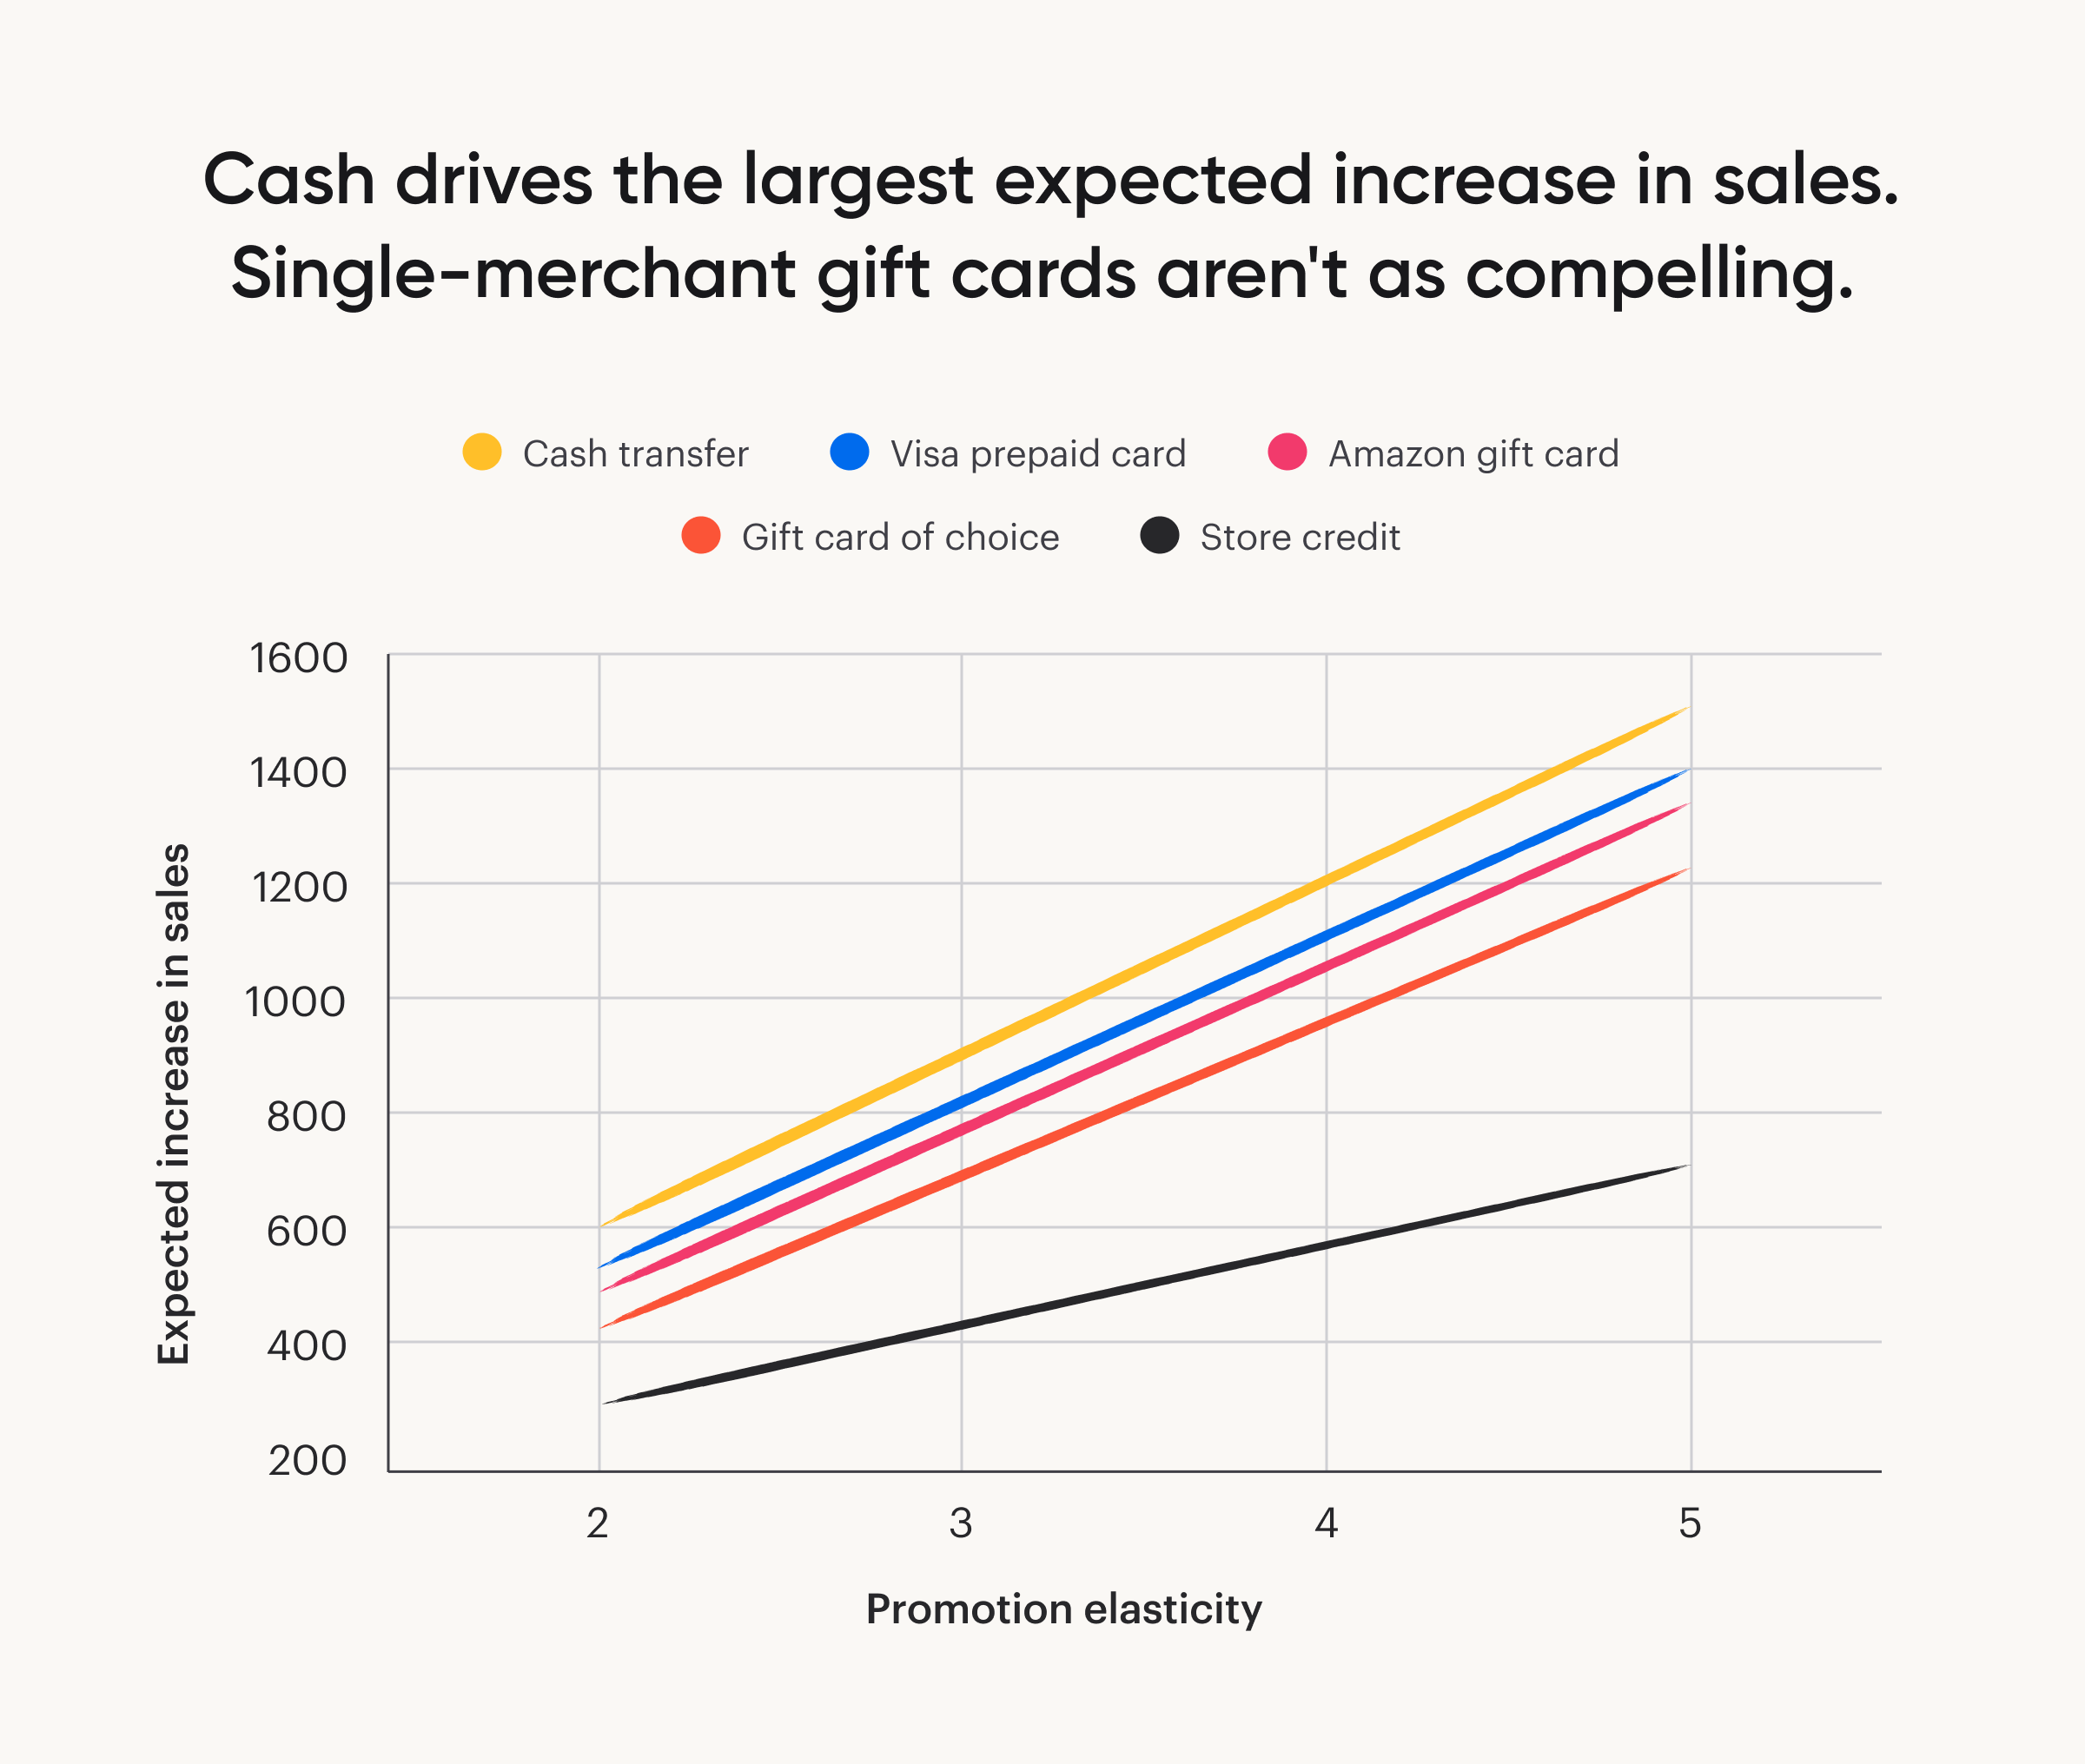 a chart showing that cash drives the largest expected increase in sales, compared to Visa prepaid cards, Amazon gift cards, gift cards of the recipients choice, and store credit.